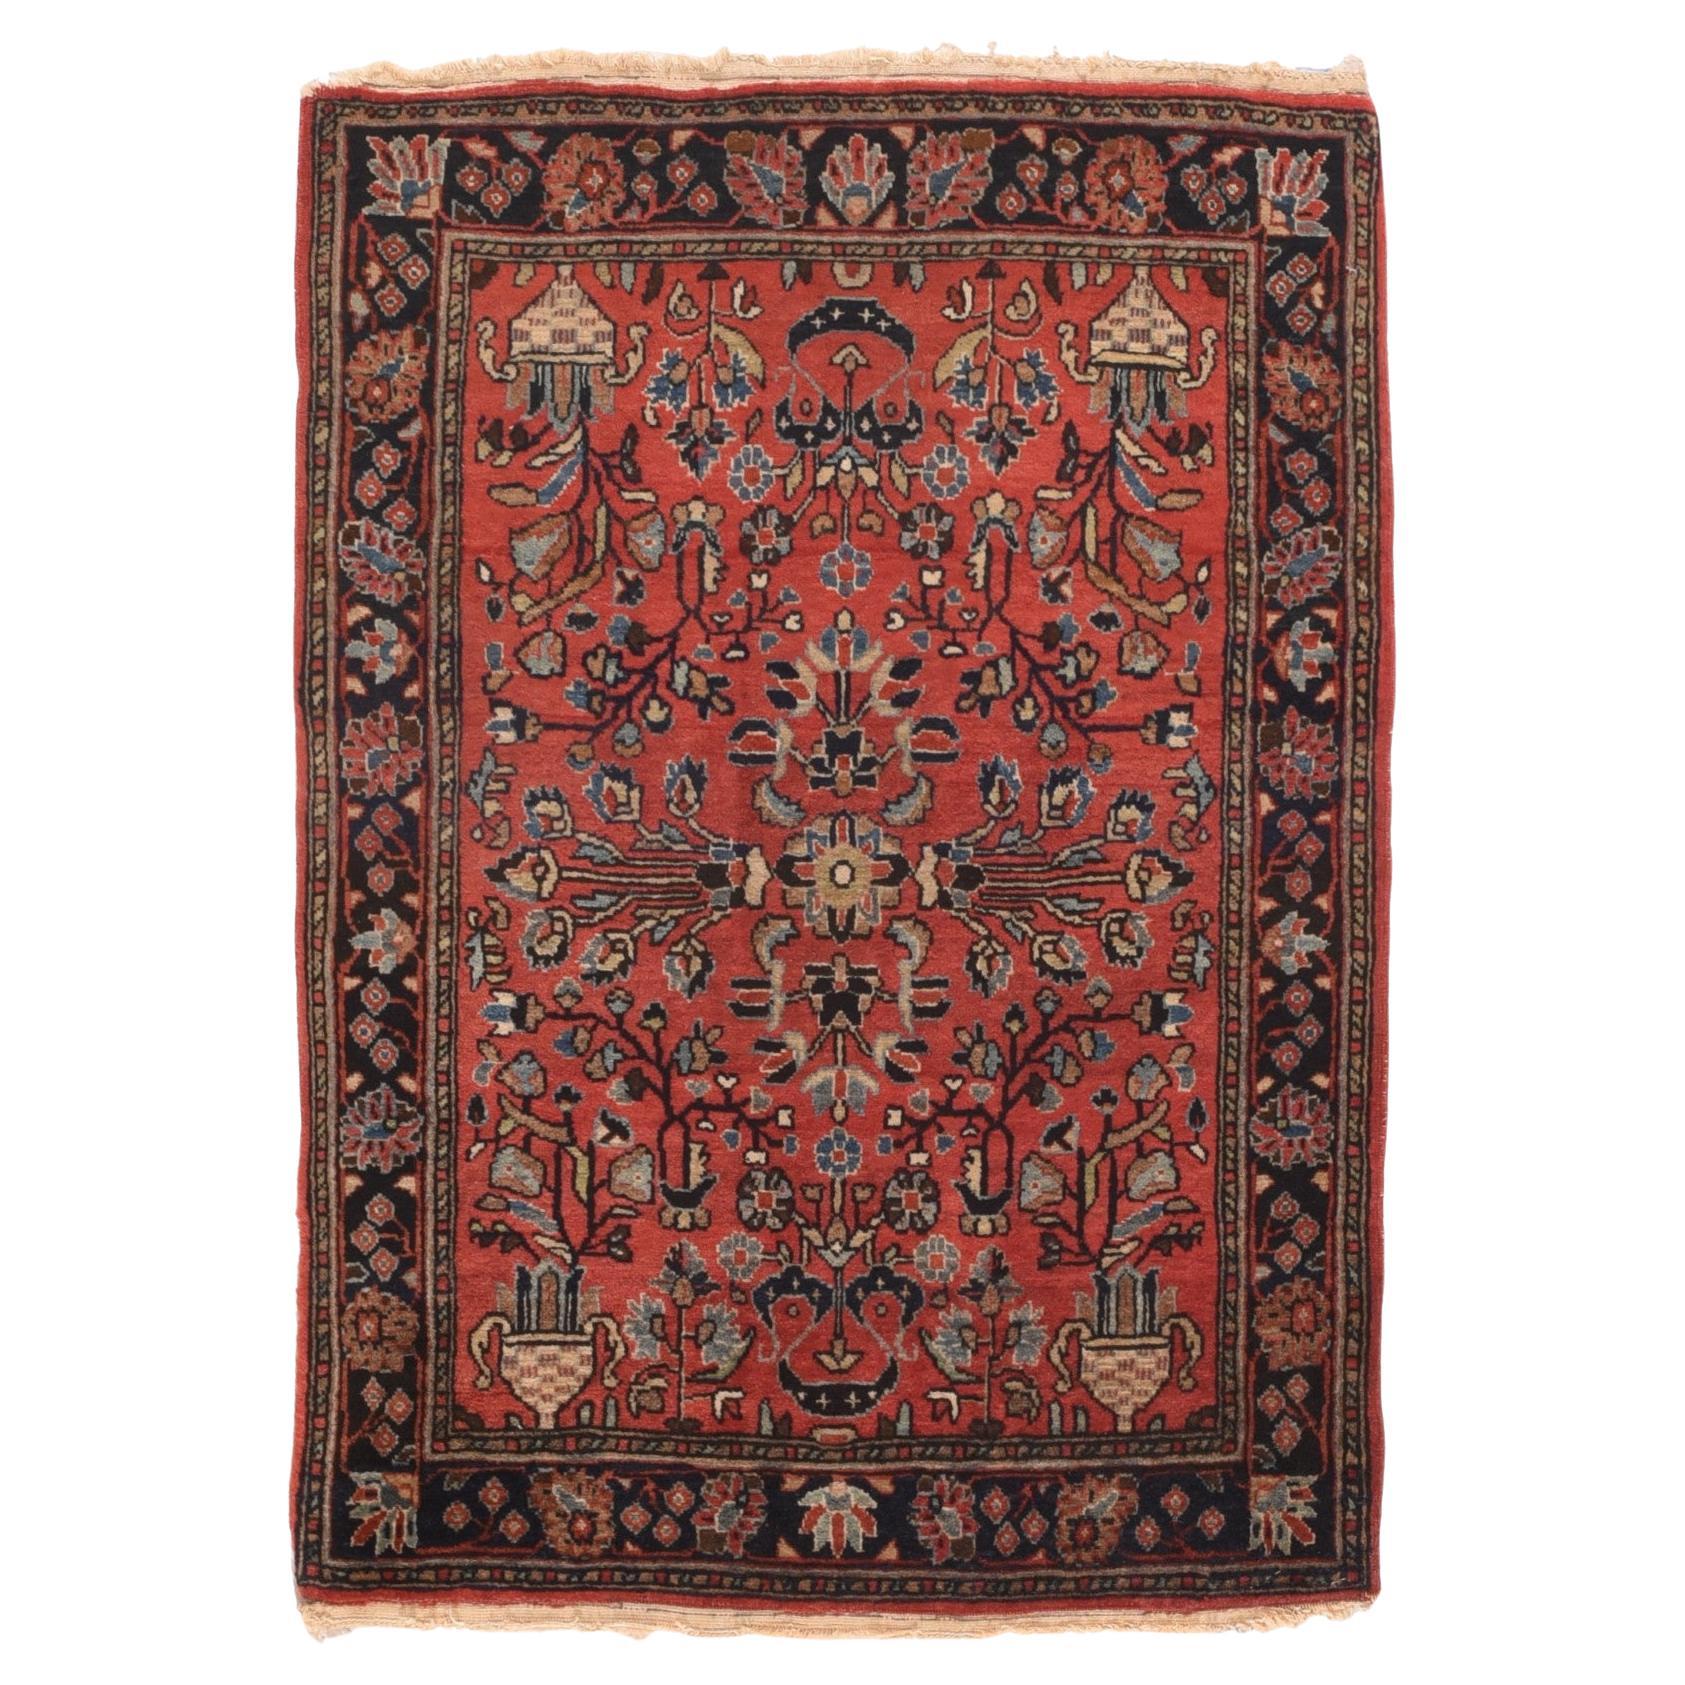 Antique Mohajeran Sarouk Rug 2' x 3'. This relatively modern West Persian village scatter with an urban texture, shows a red-rose field with chequered corner vases and a central rosette. Green, medium blue, navy, straw and ecru-beige accent the